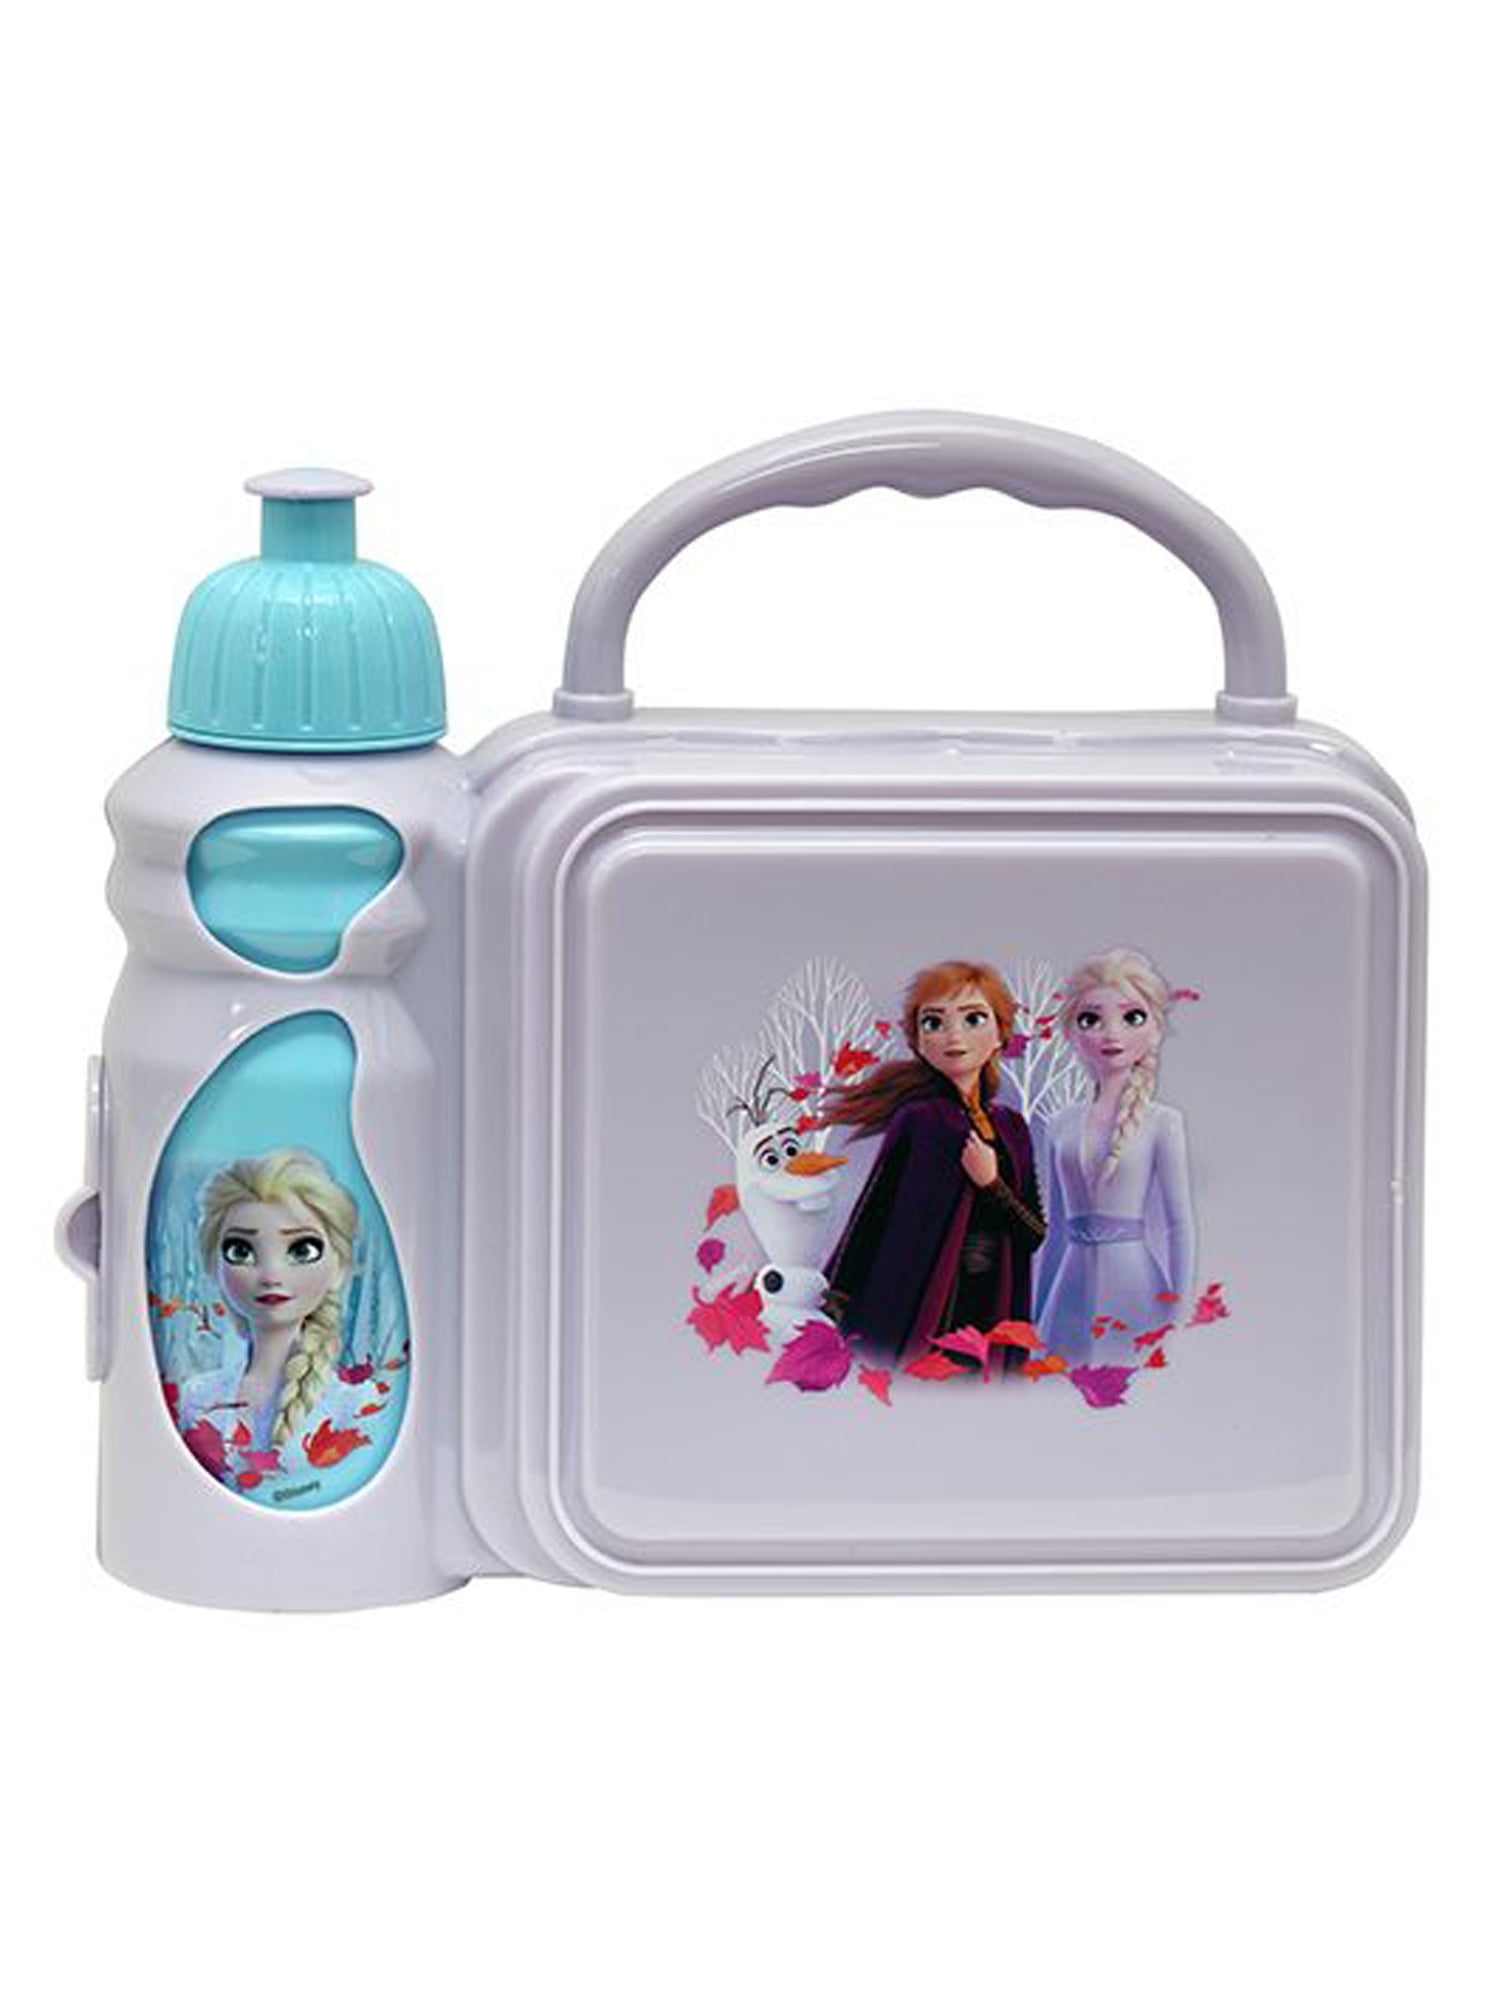 Disney Frozen Lunch Box and Drinks Bottle with Anna Elsa and Olaf 